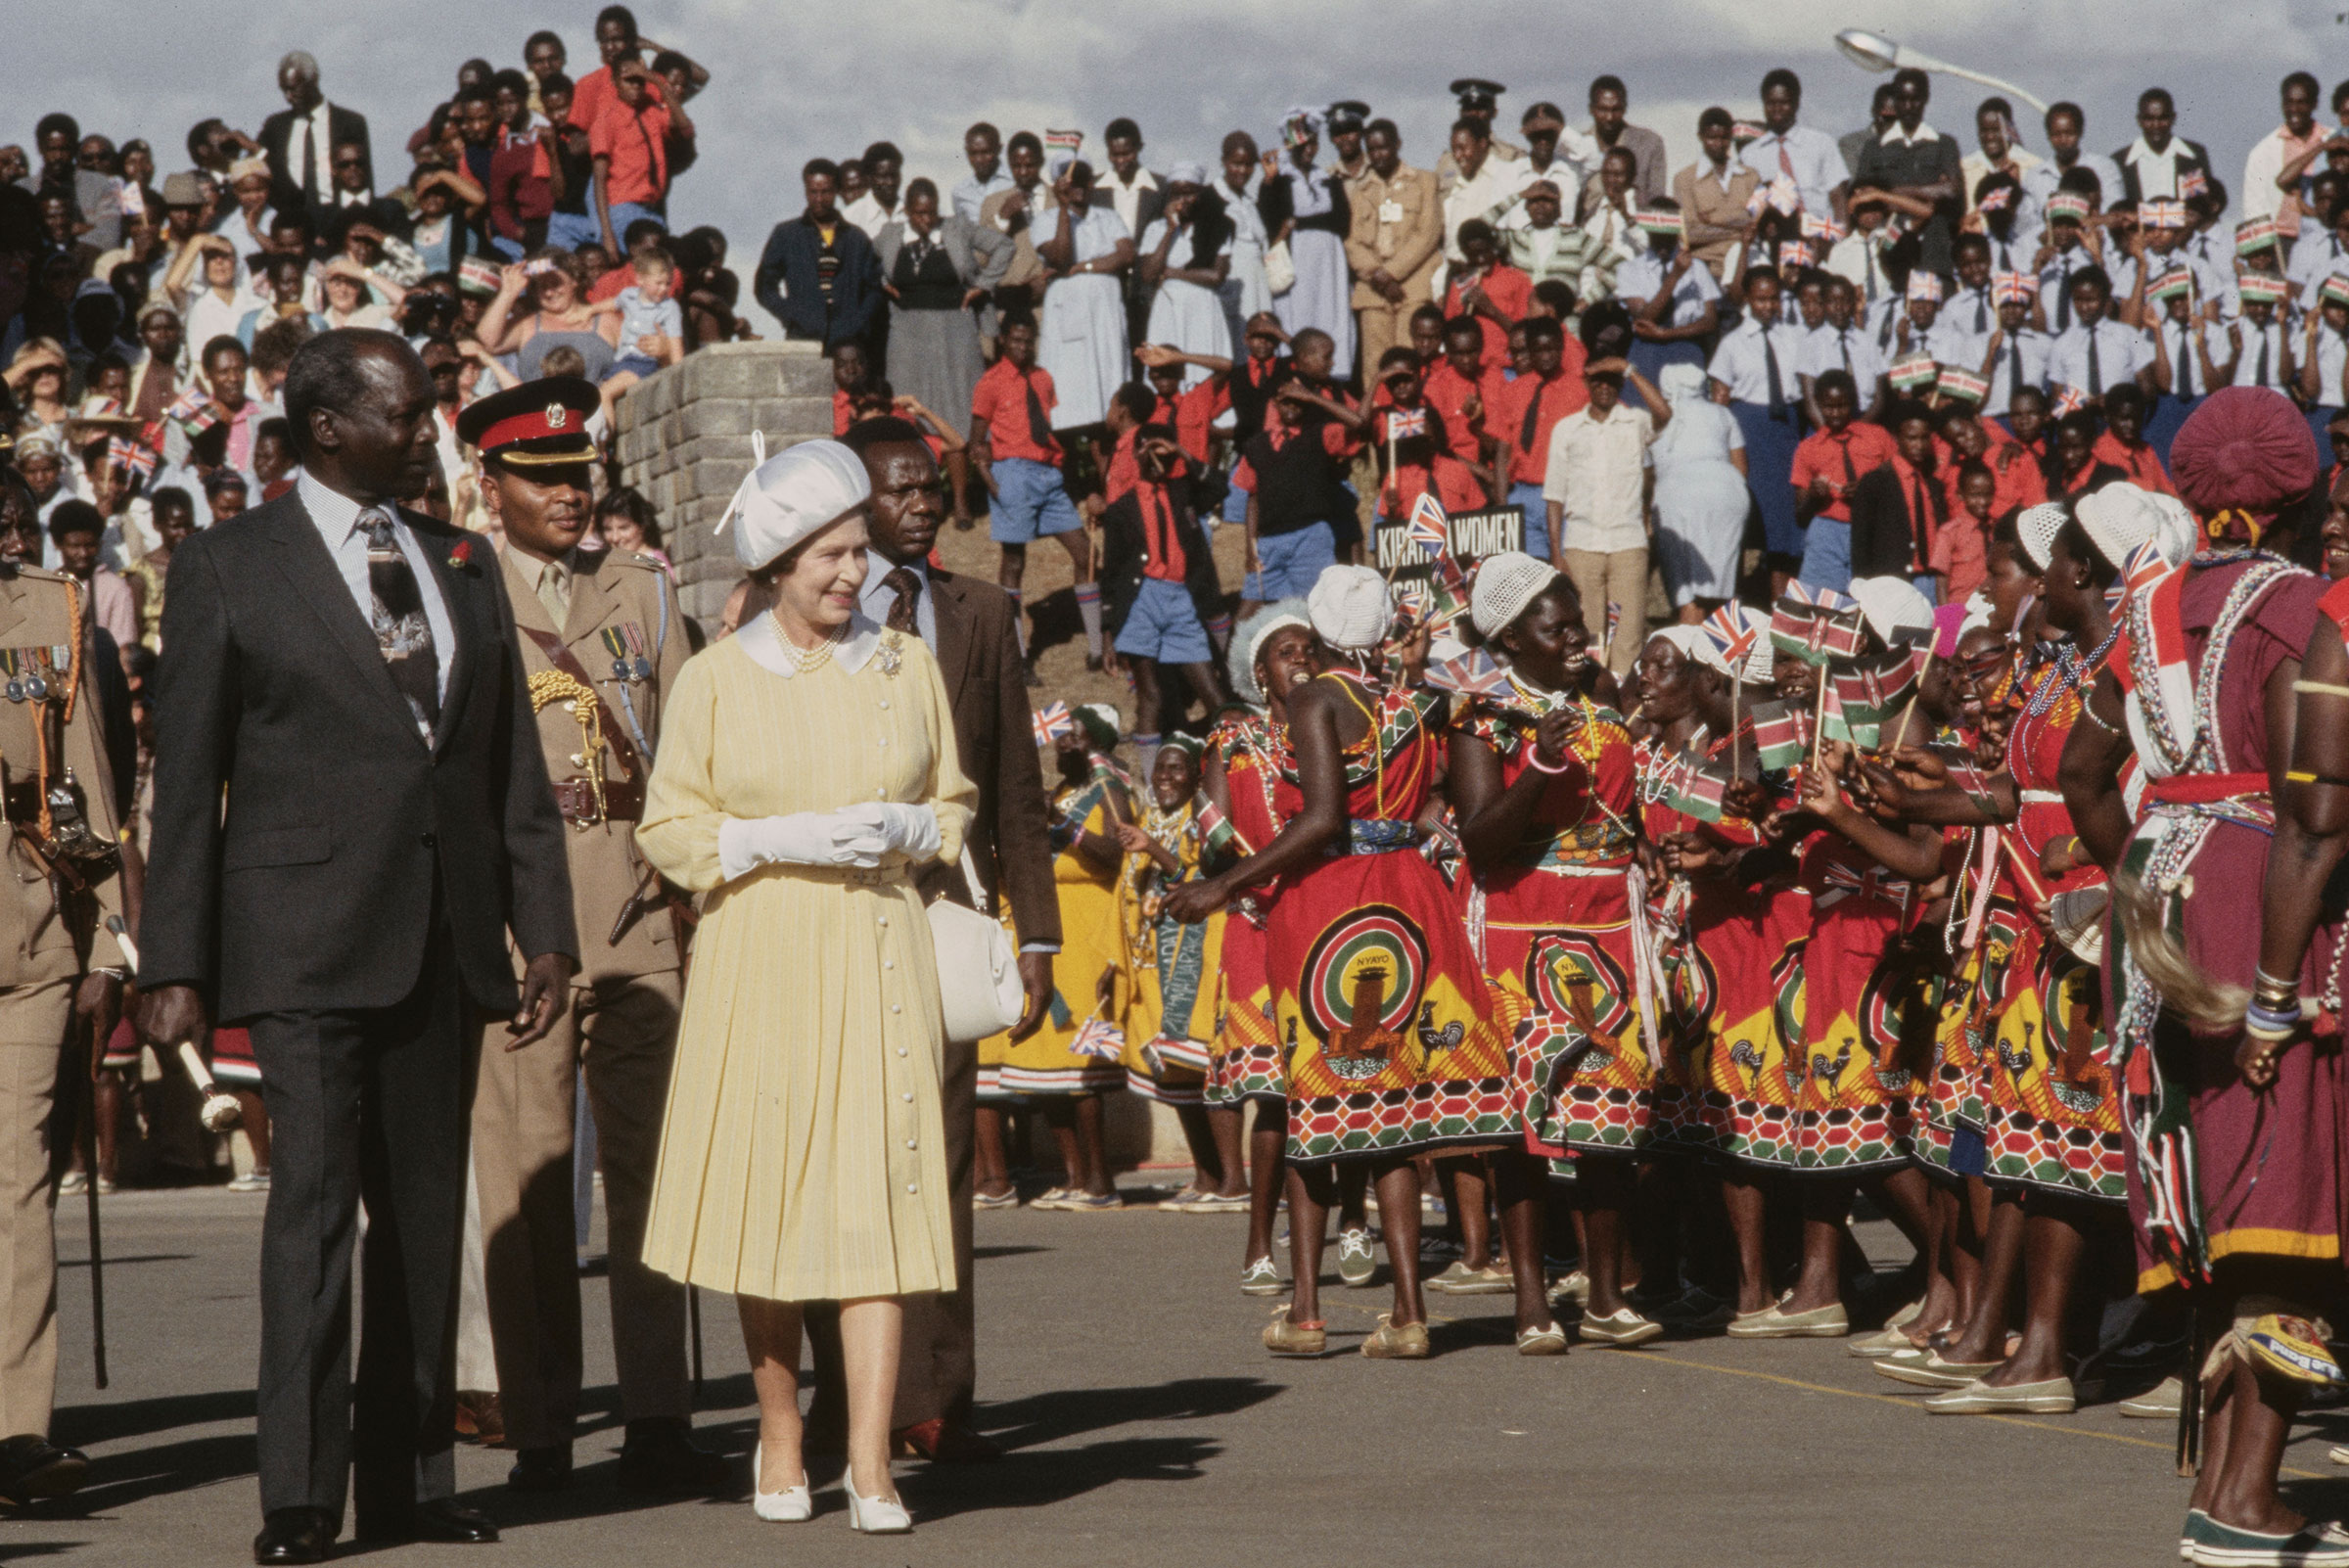 Queen Elizabeth II: a reign that saw the end of the British empire